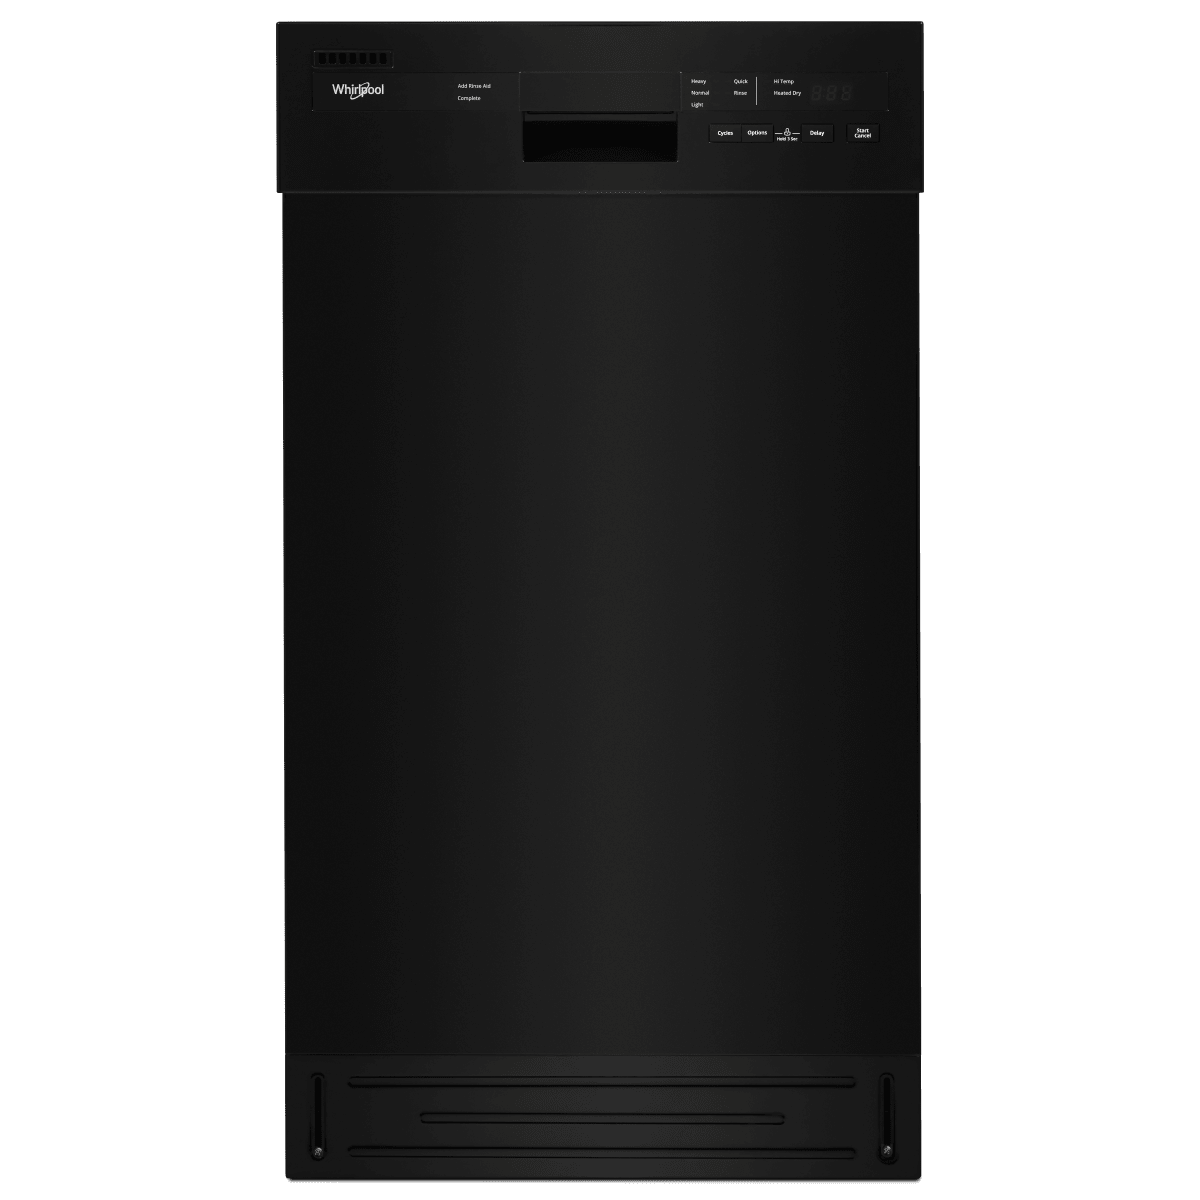 Whirlpool 18 Inch Wide 8 Place Setting Energy Star Rated Built-In Fully Integrated Dishwasher